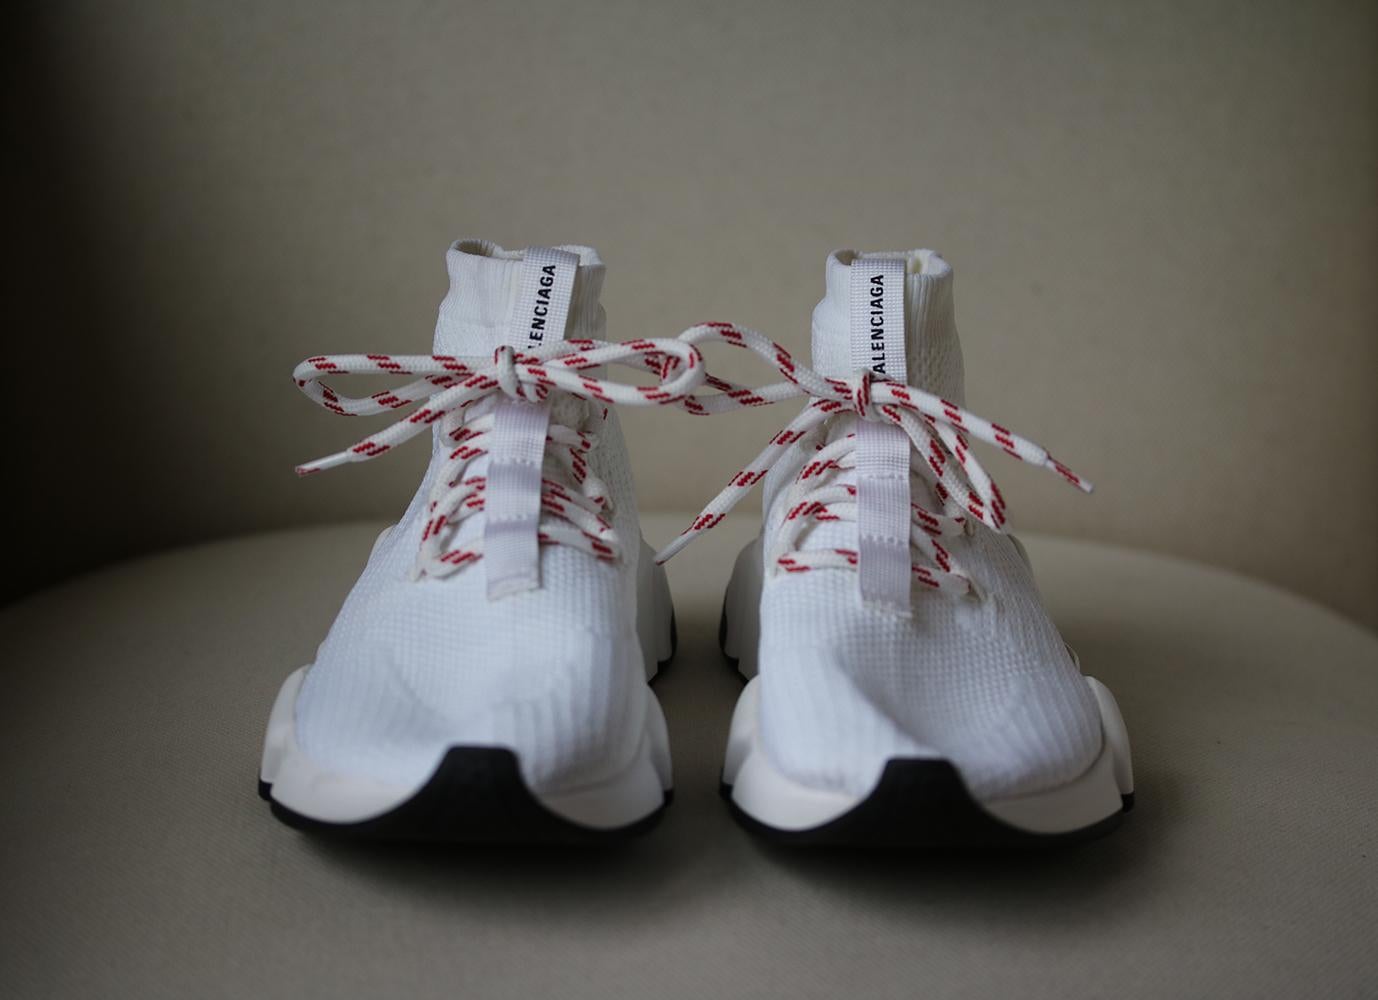 Balenciaga's 'Speed' sneakers have memory foam soles that weigh as little as eight and a half ounces to recreate the feeling of walking on air. This pair is made from flexible white stretch-knit and has contrasting red laces. Sole measures